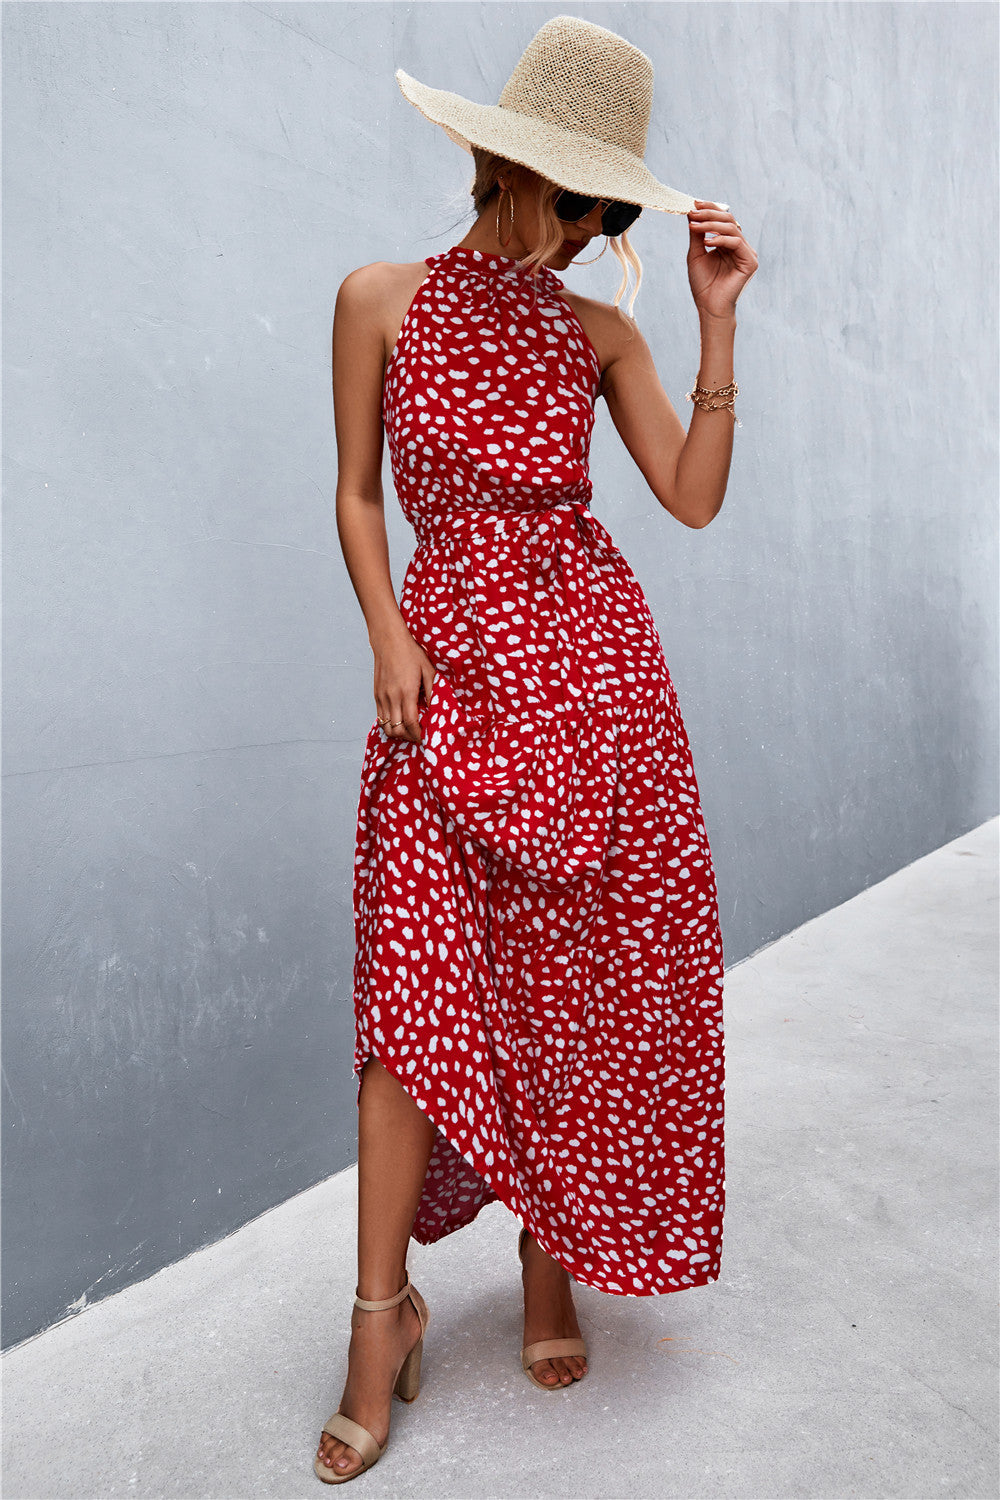 Shop the Printed Sleeveless Tie Waist Maxi Dress in 11 colors - perfect for summer days & elegant evenings. Flattering fit for every occasion.